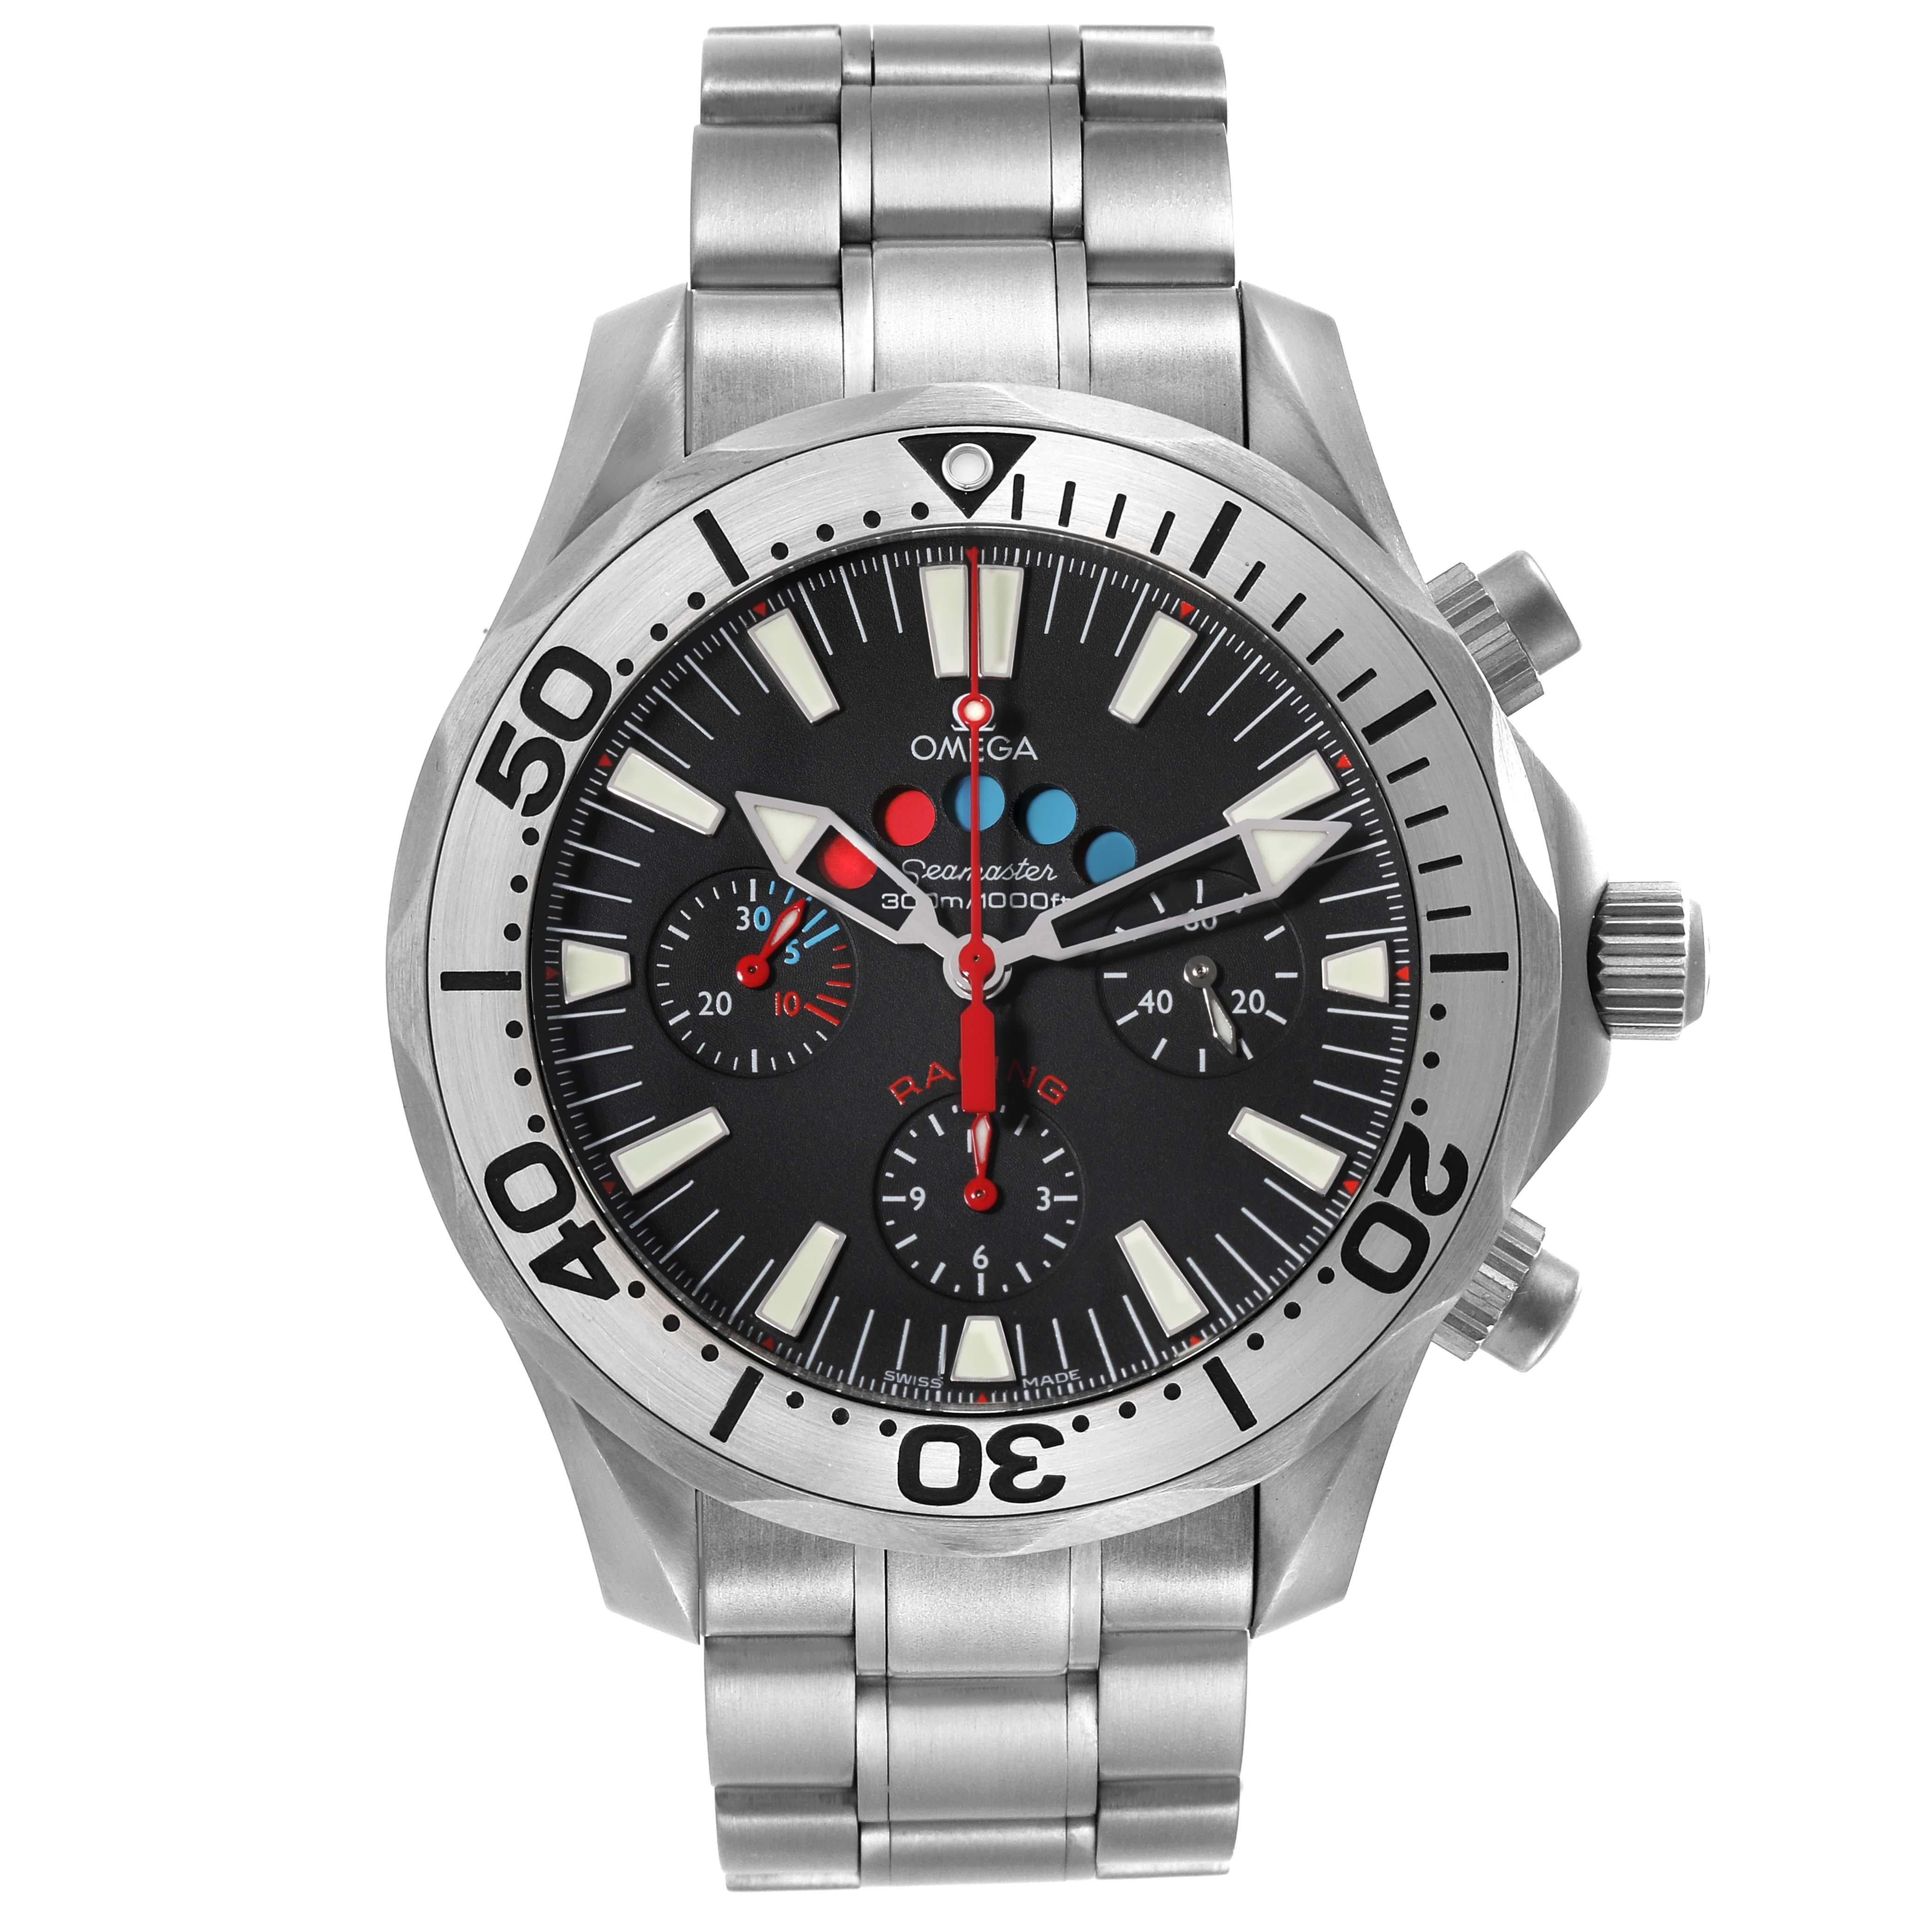 Omega Seamaster Regatta Racing Titanium Mens Watch 2269.52.00 Card. Officially certified chronometer automatic self-winding movement. Chronograph function. Titanium case 44 mm in diameter. Omega logo on a crown. Unidirectional rotating ratcheted